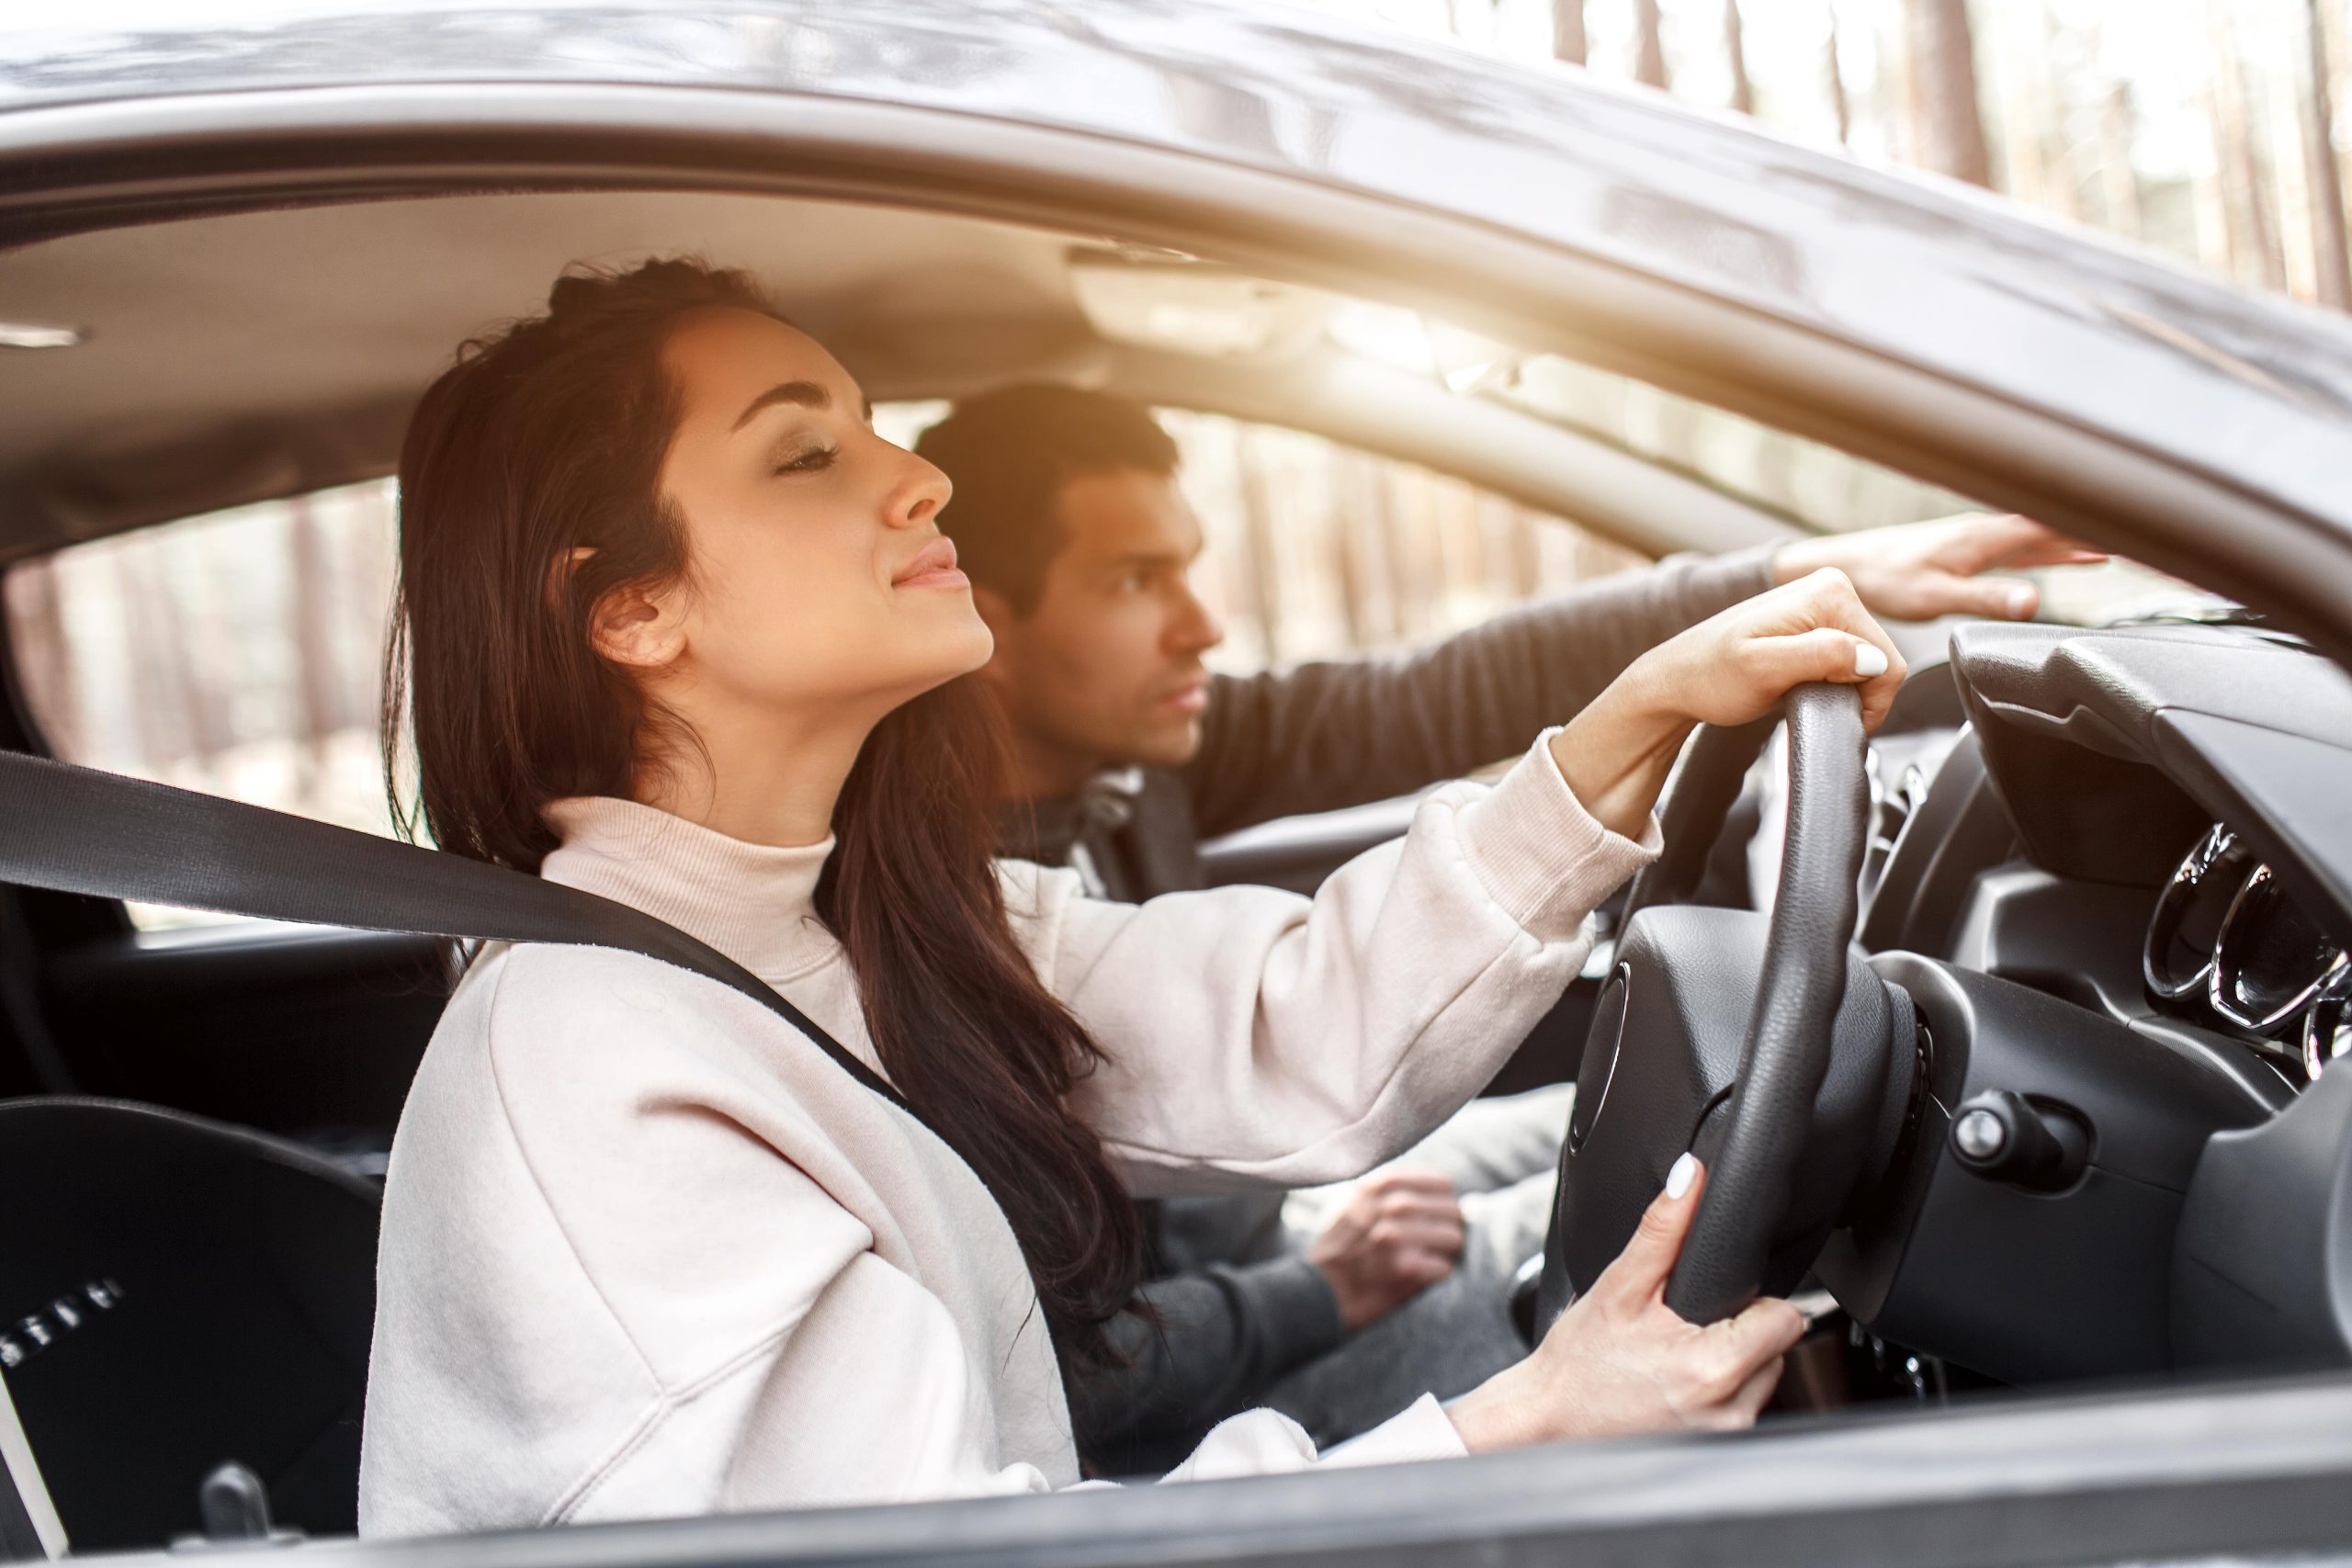 Who can trainee driving instructors provide lessons to?